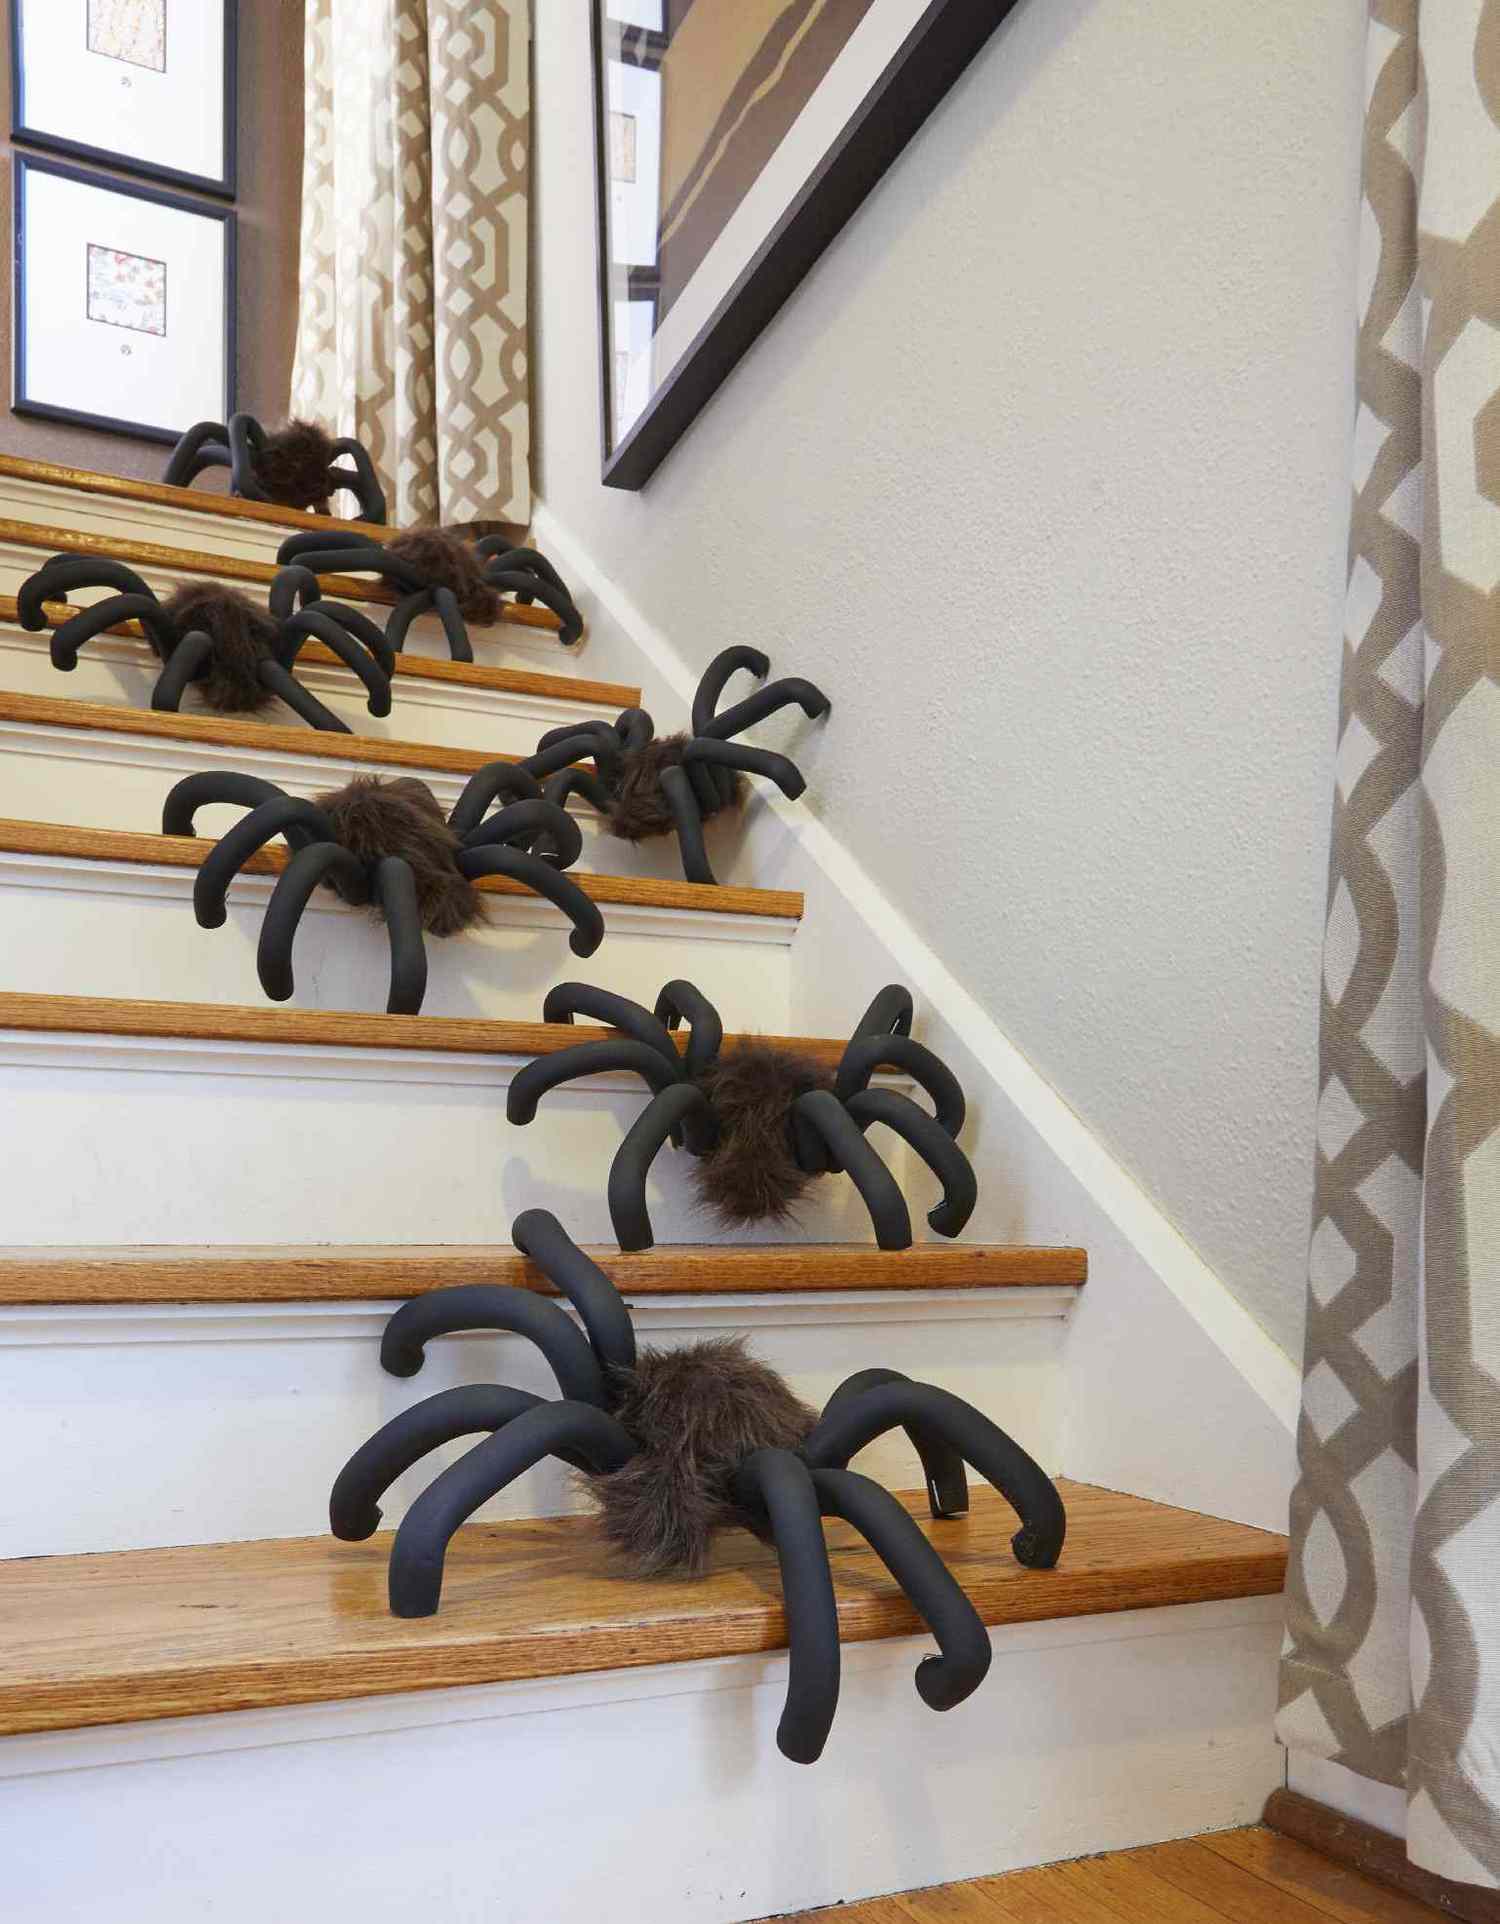 These Giant Diy Spiders Are Our New Favorite Halloween Decor